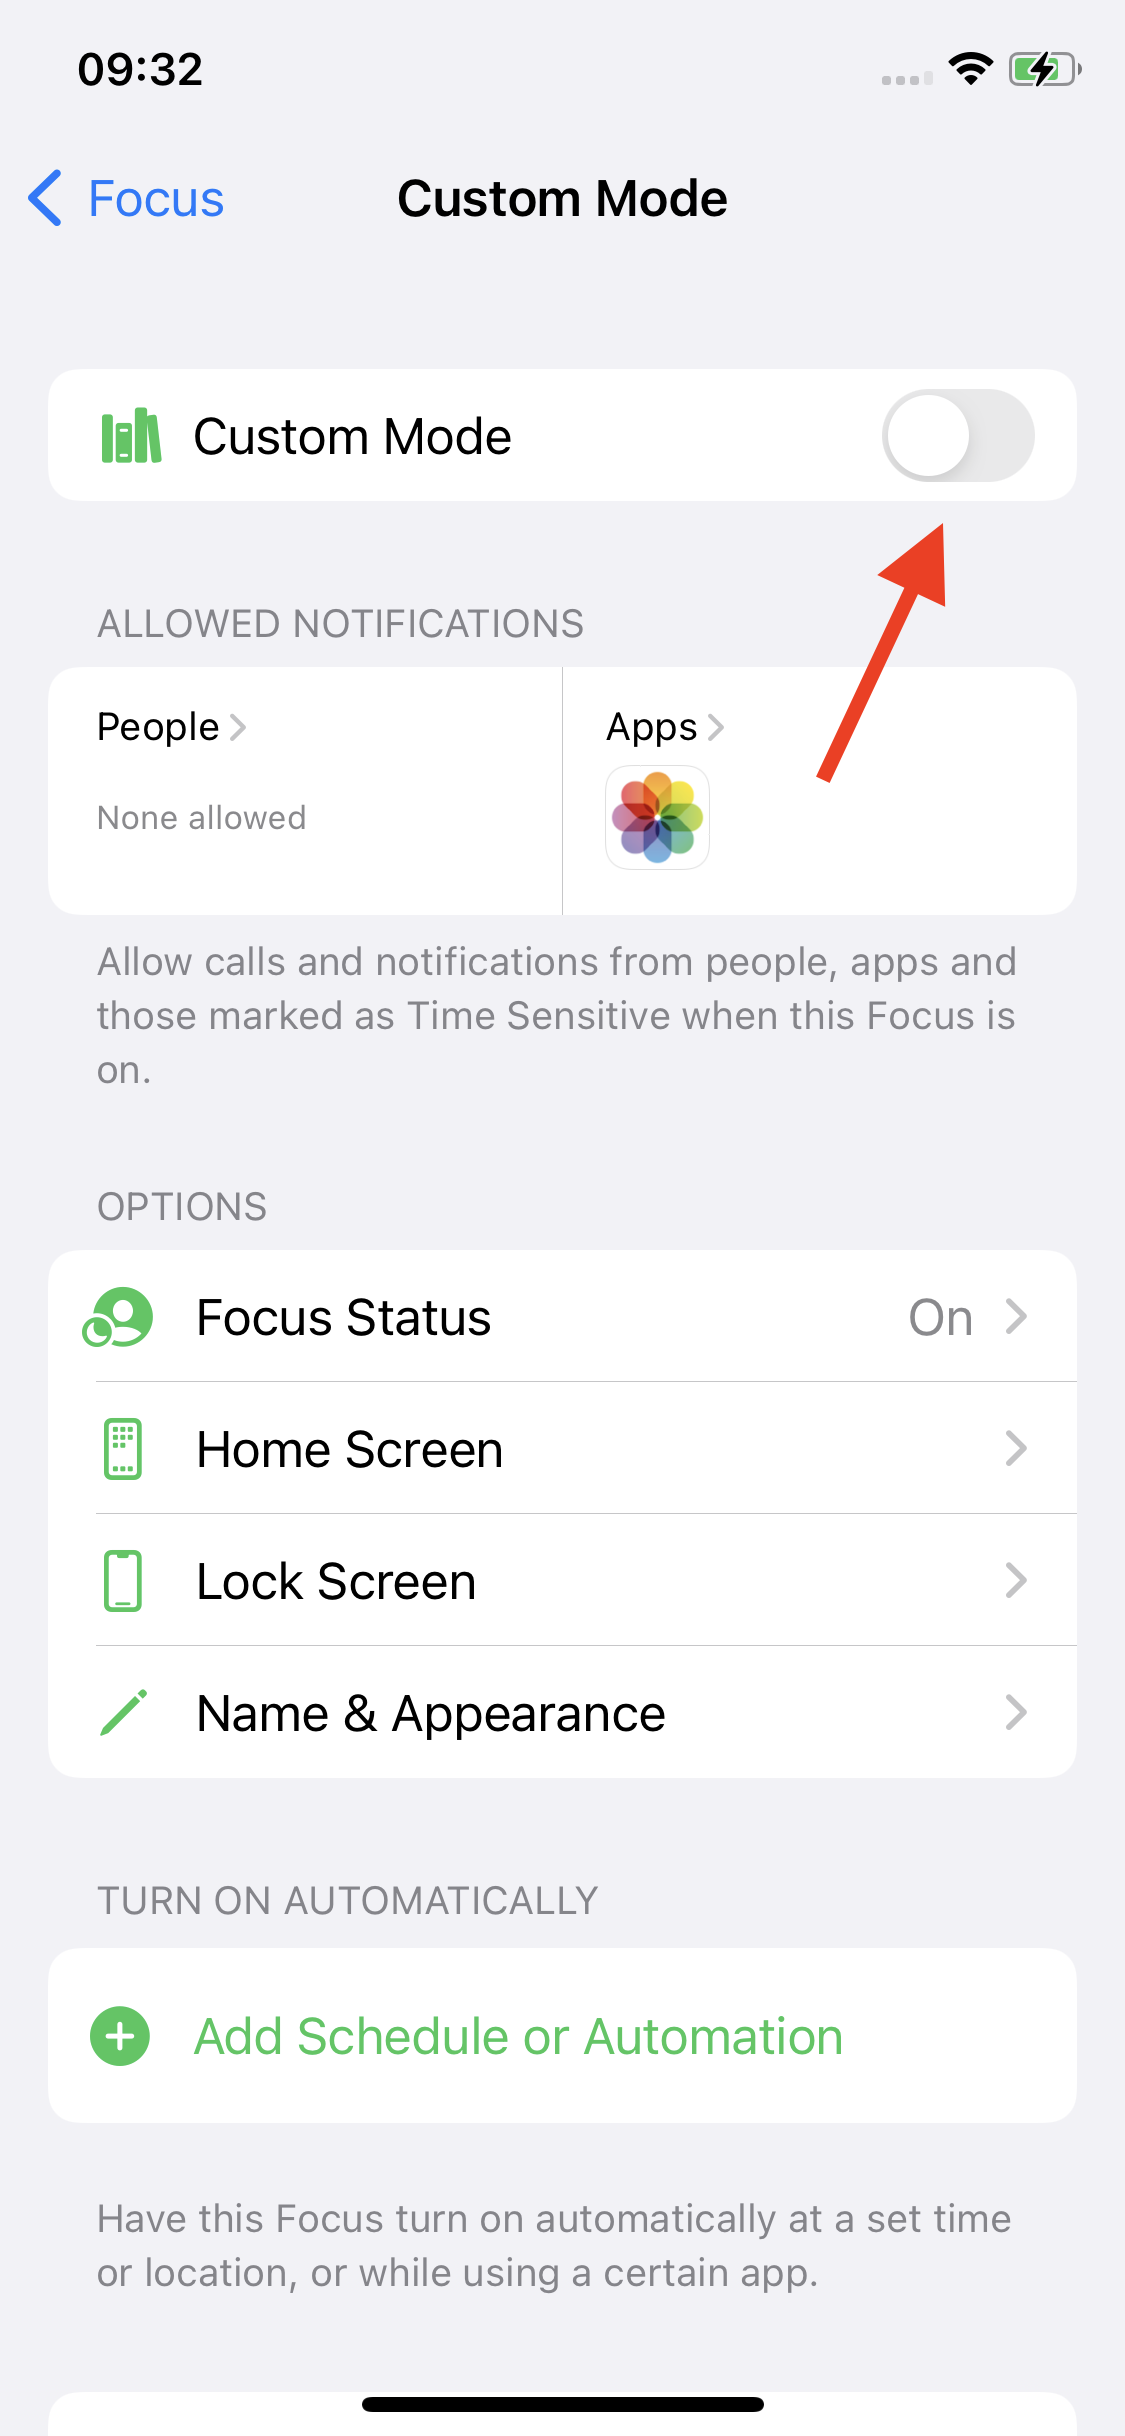 Toggle on your Custom Focus Mode